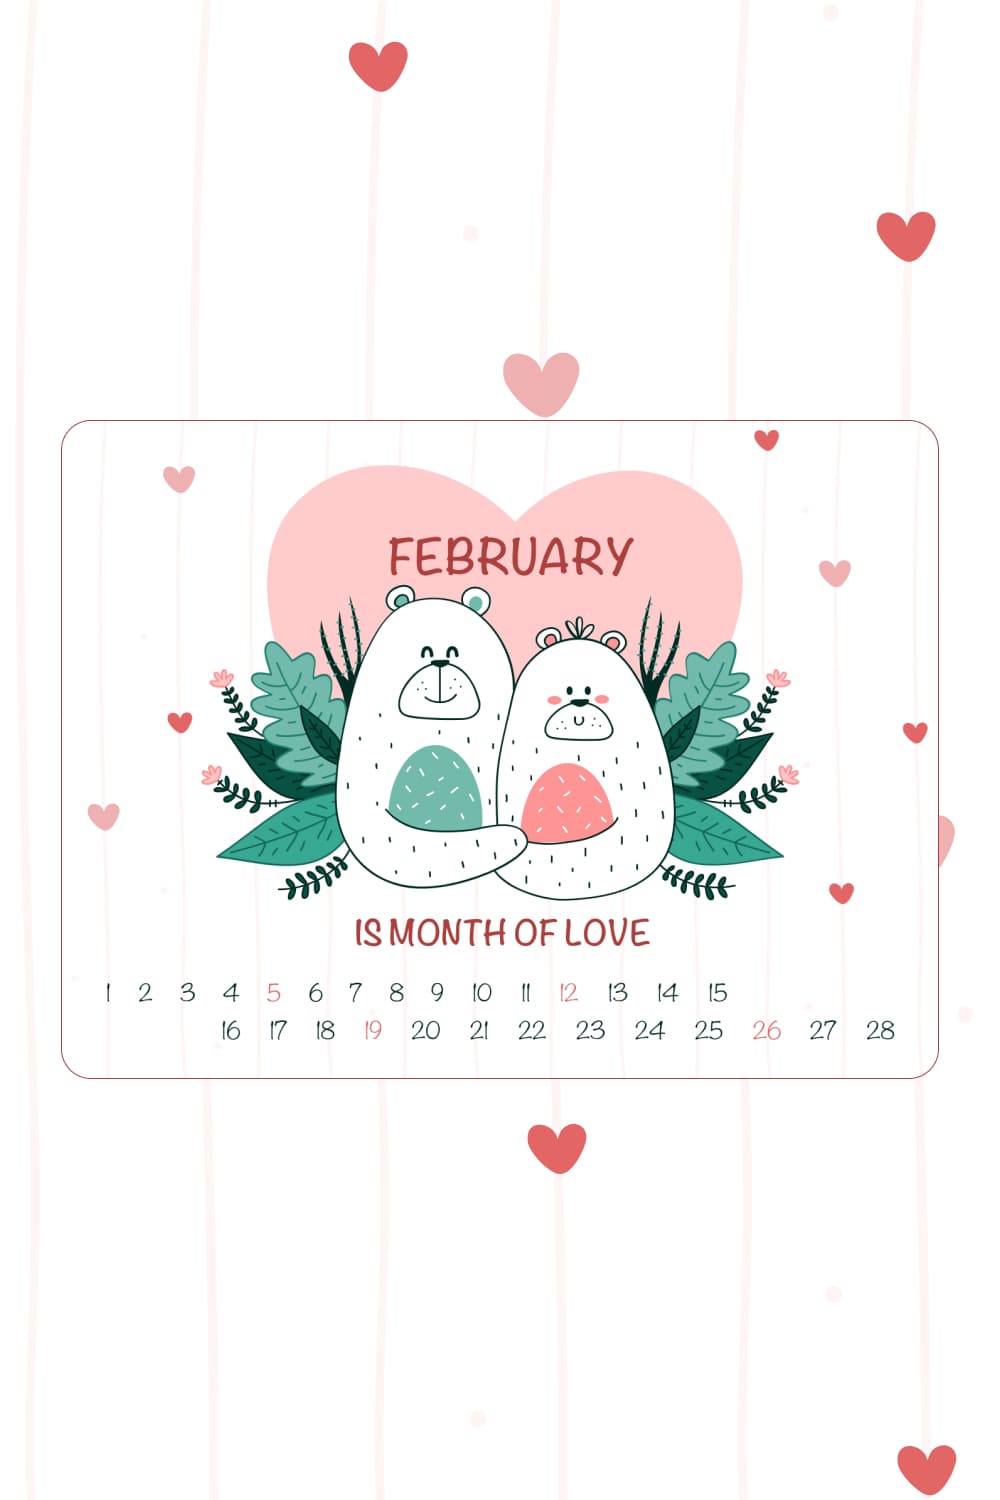 Free February Month Calendar, picture for pinterest.